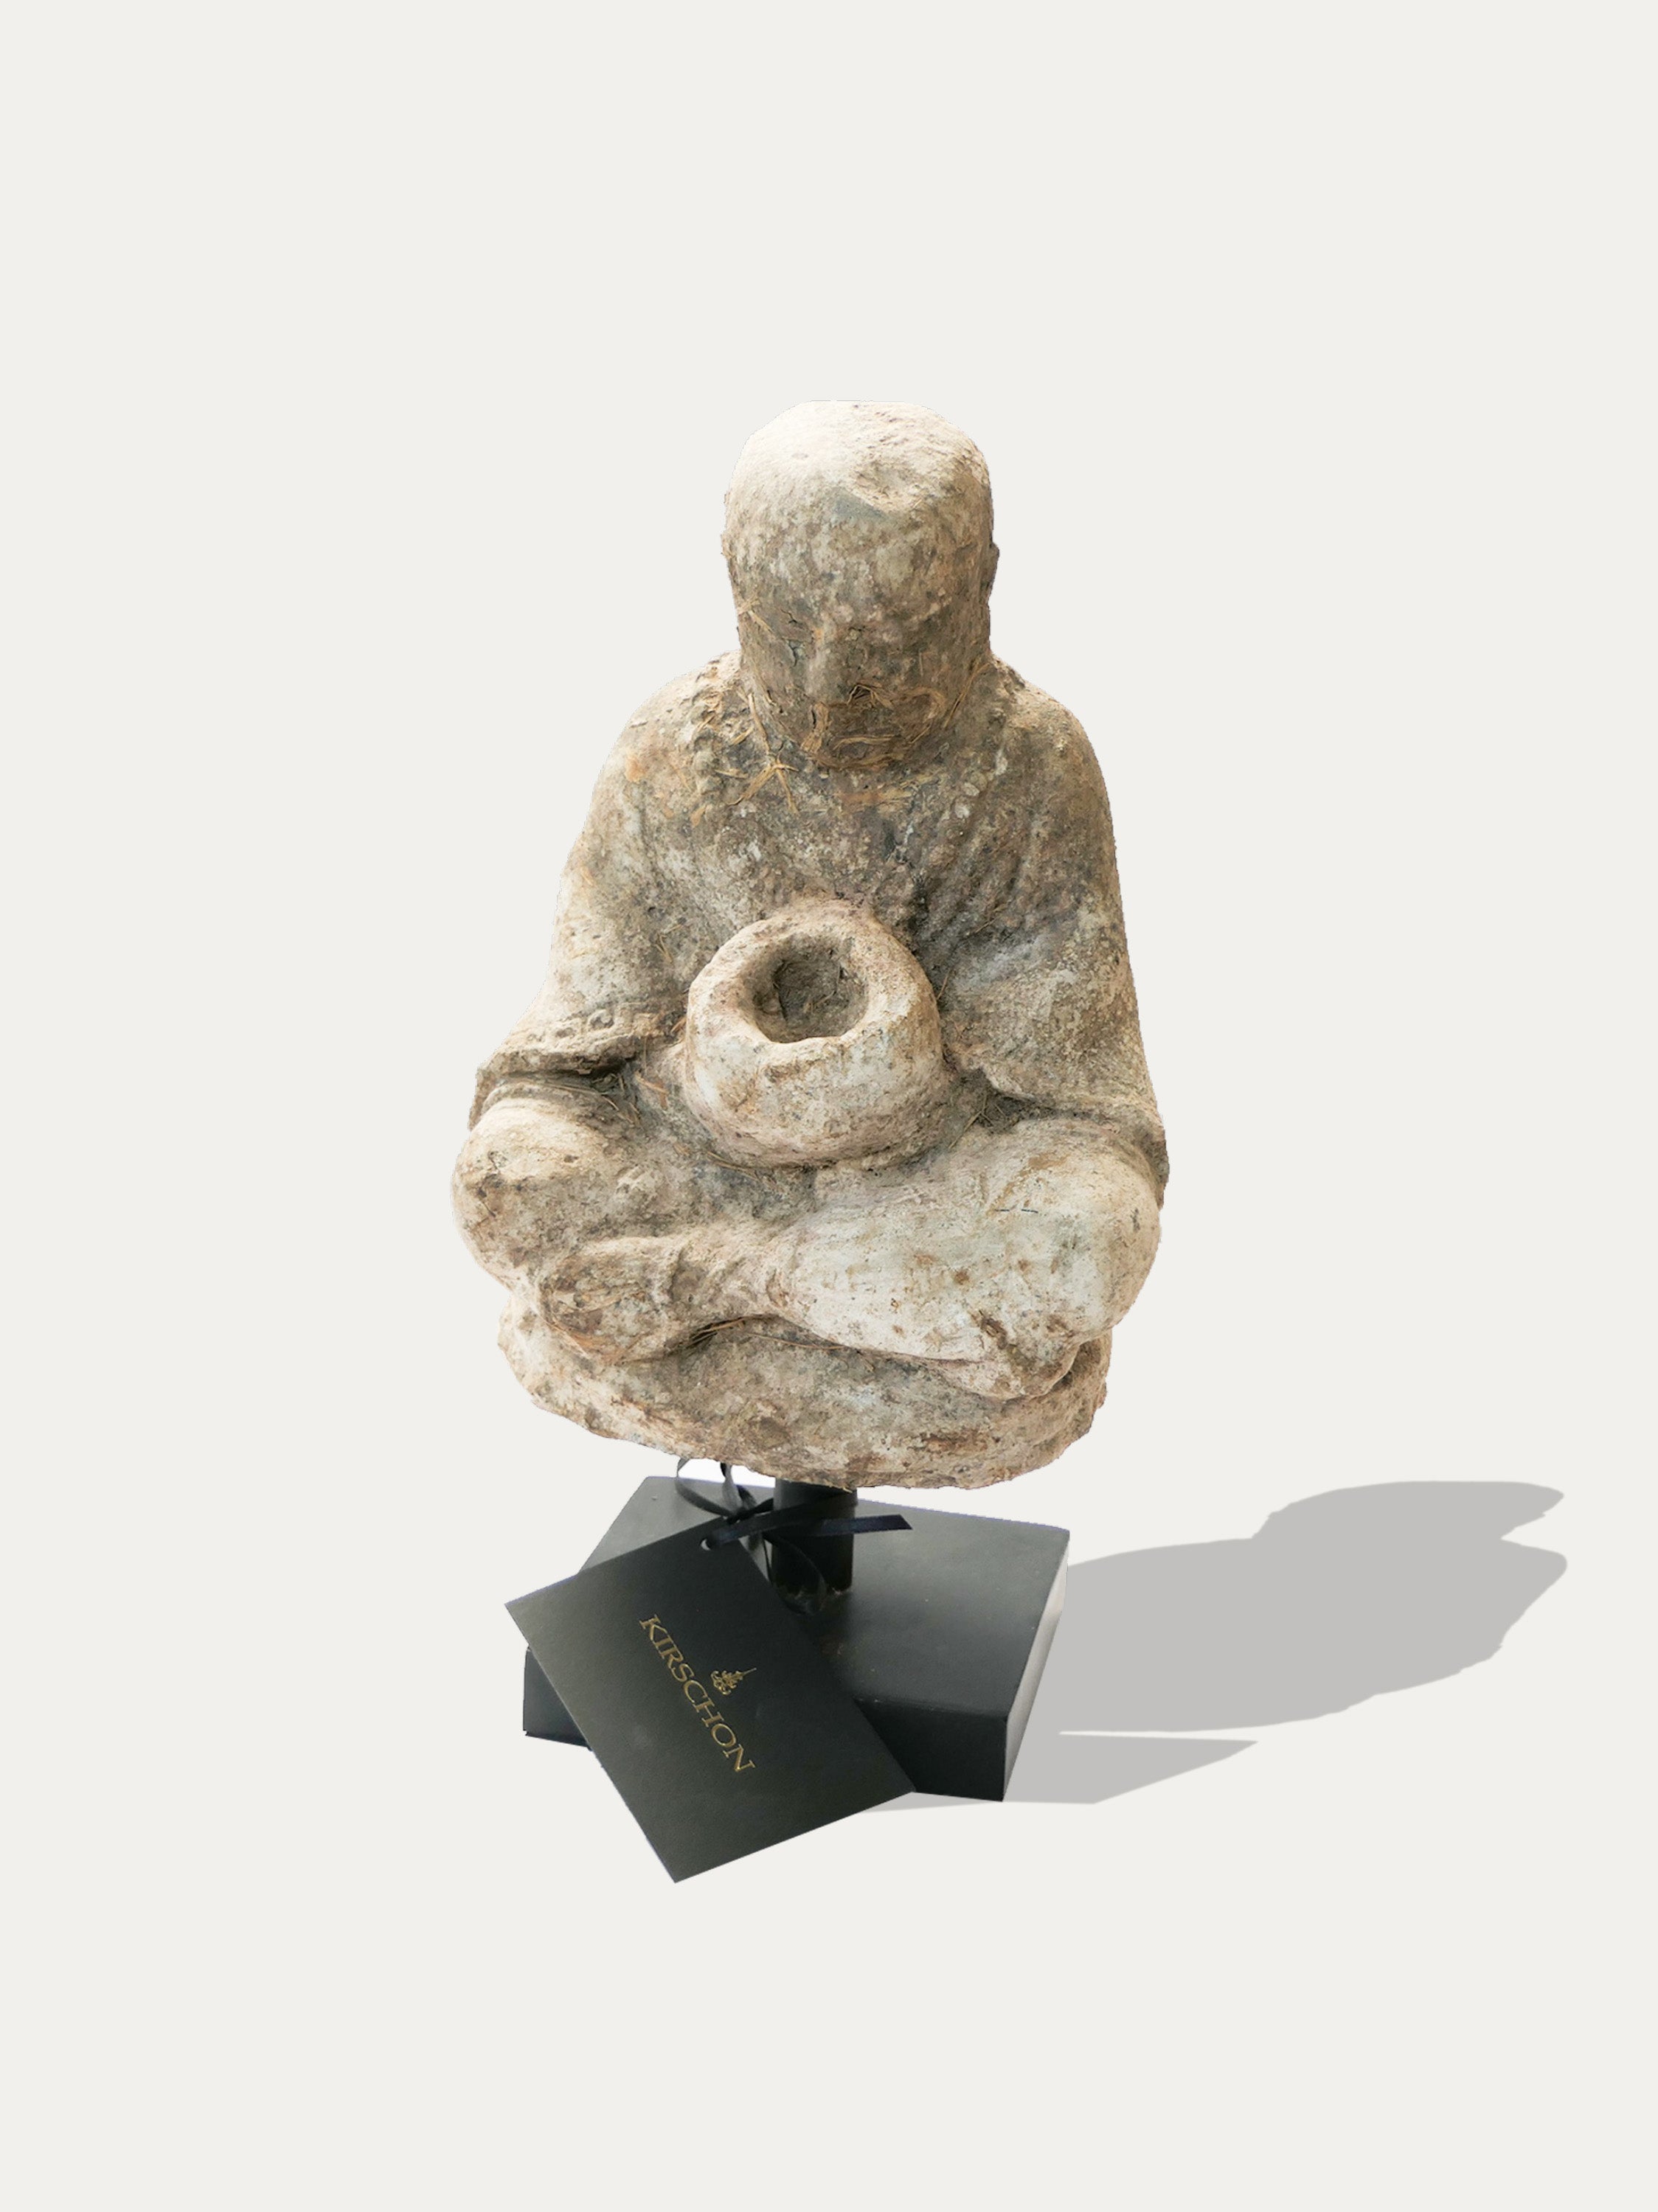 Monk statue with Alms bowl - Asian Art from Kirschon